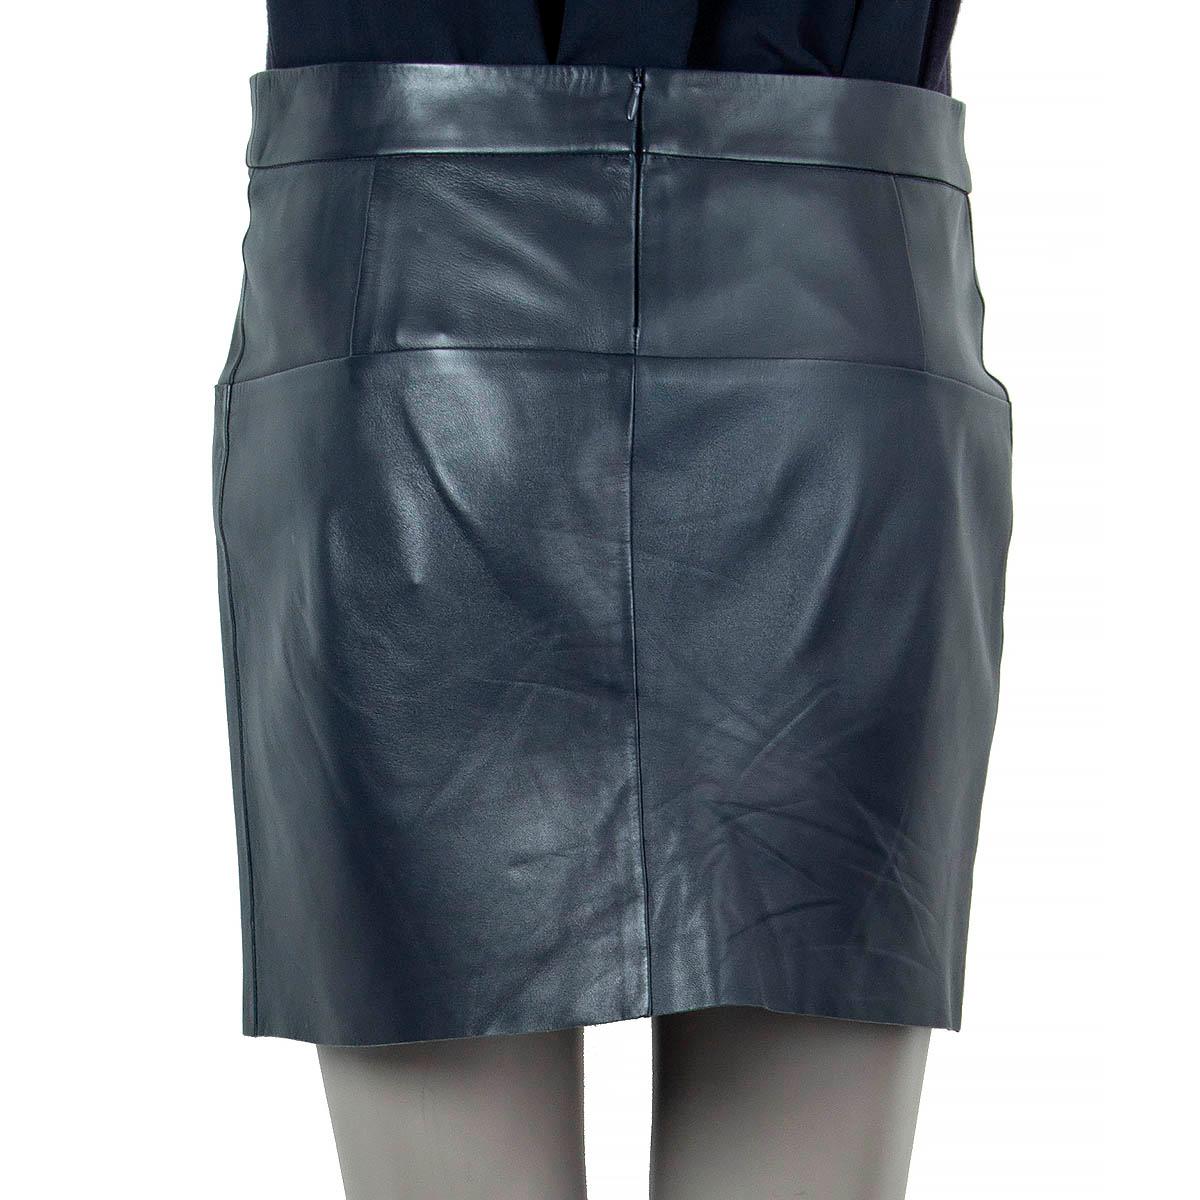 CELINE navy blue leather FRONT POCKET MINI Skirt 36 XS In Excellent Condition For Sale In Zürich, CH